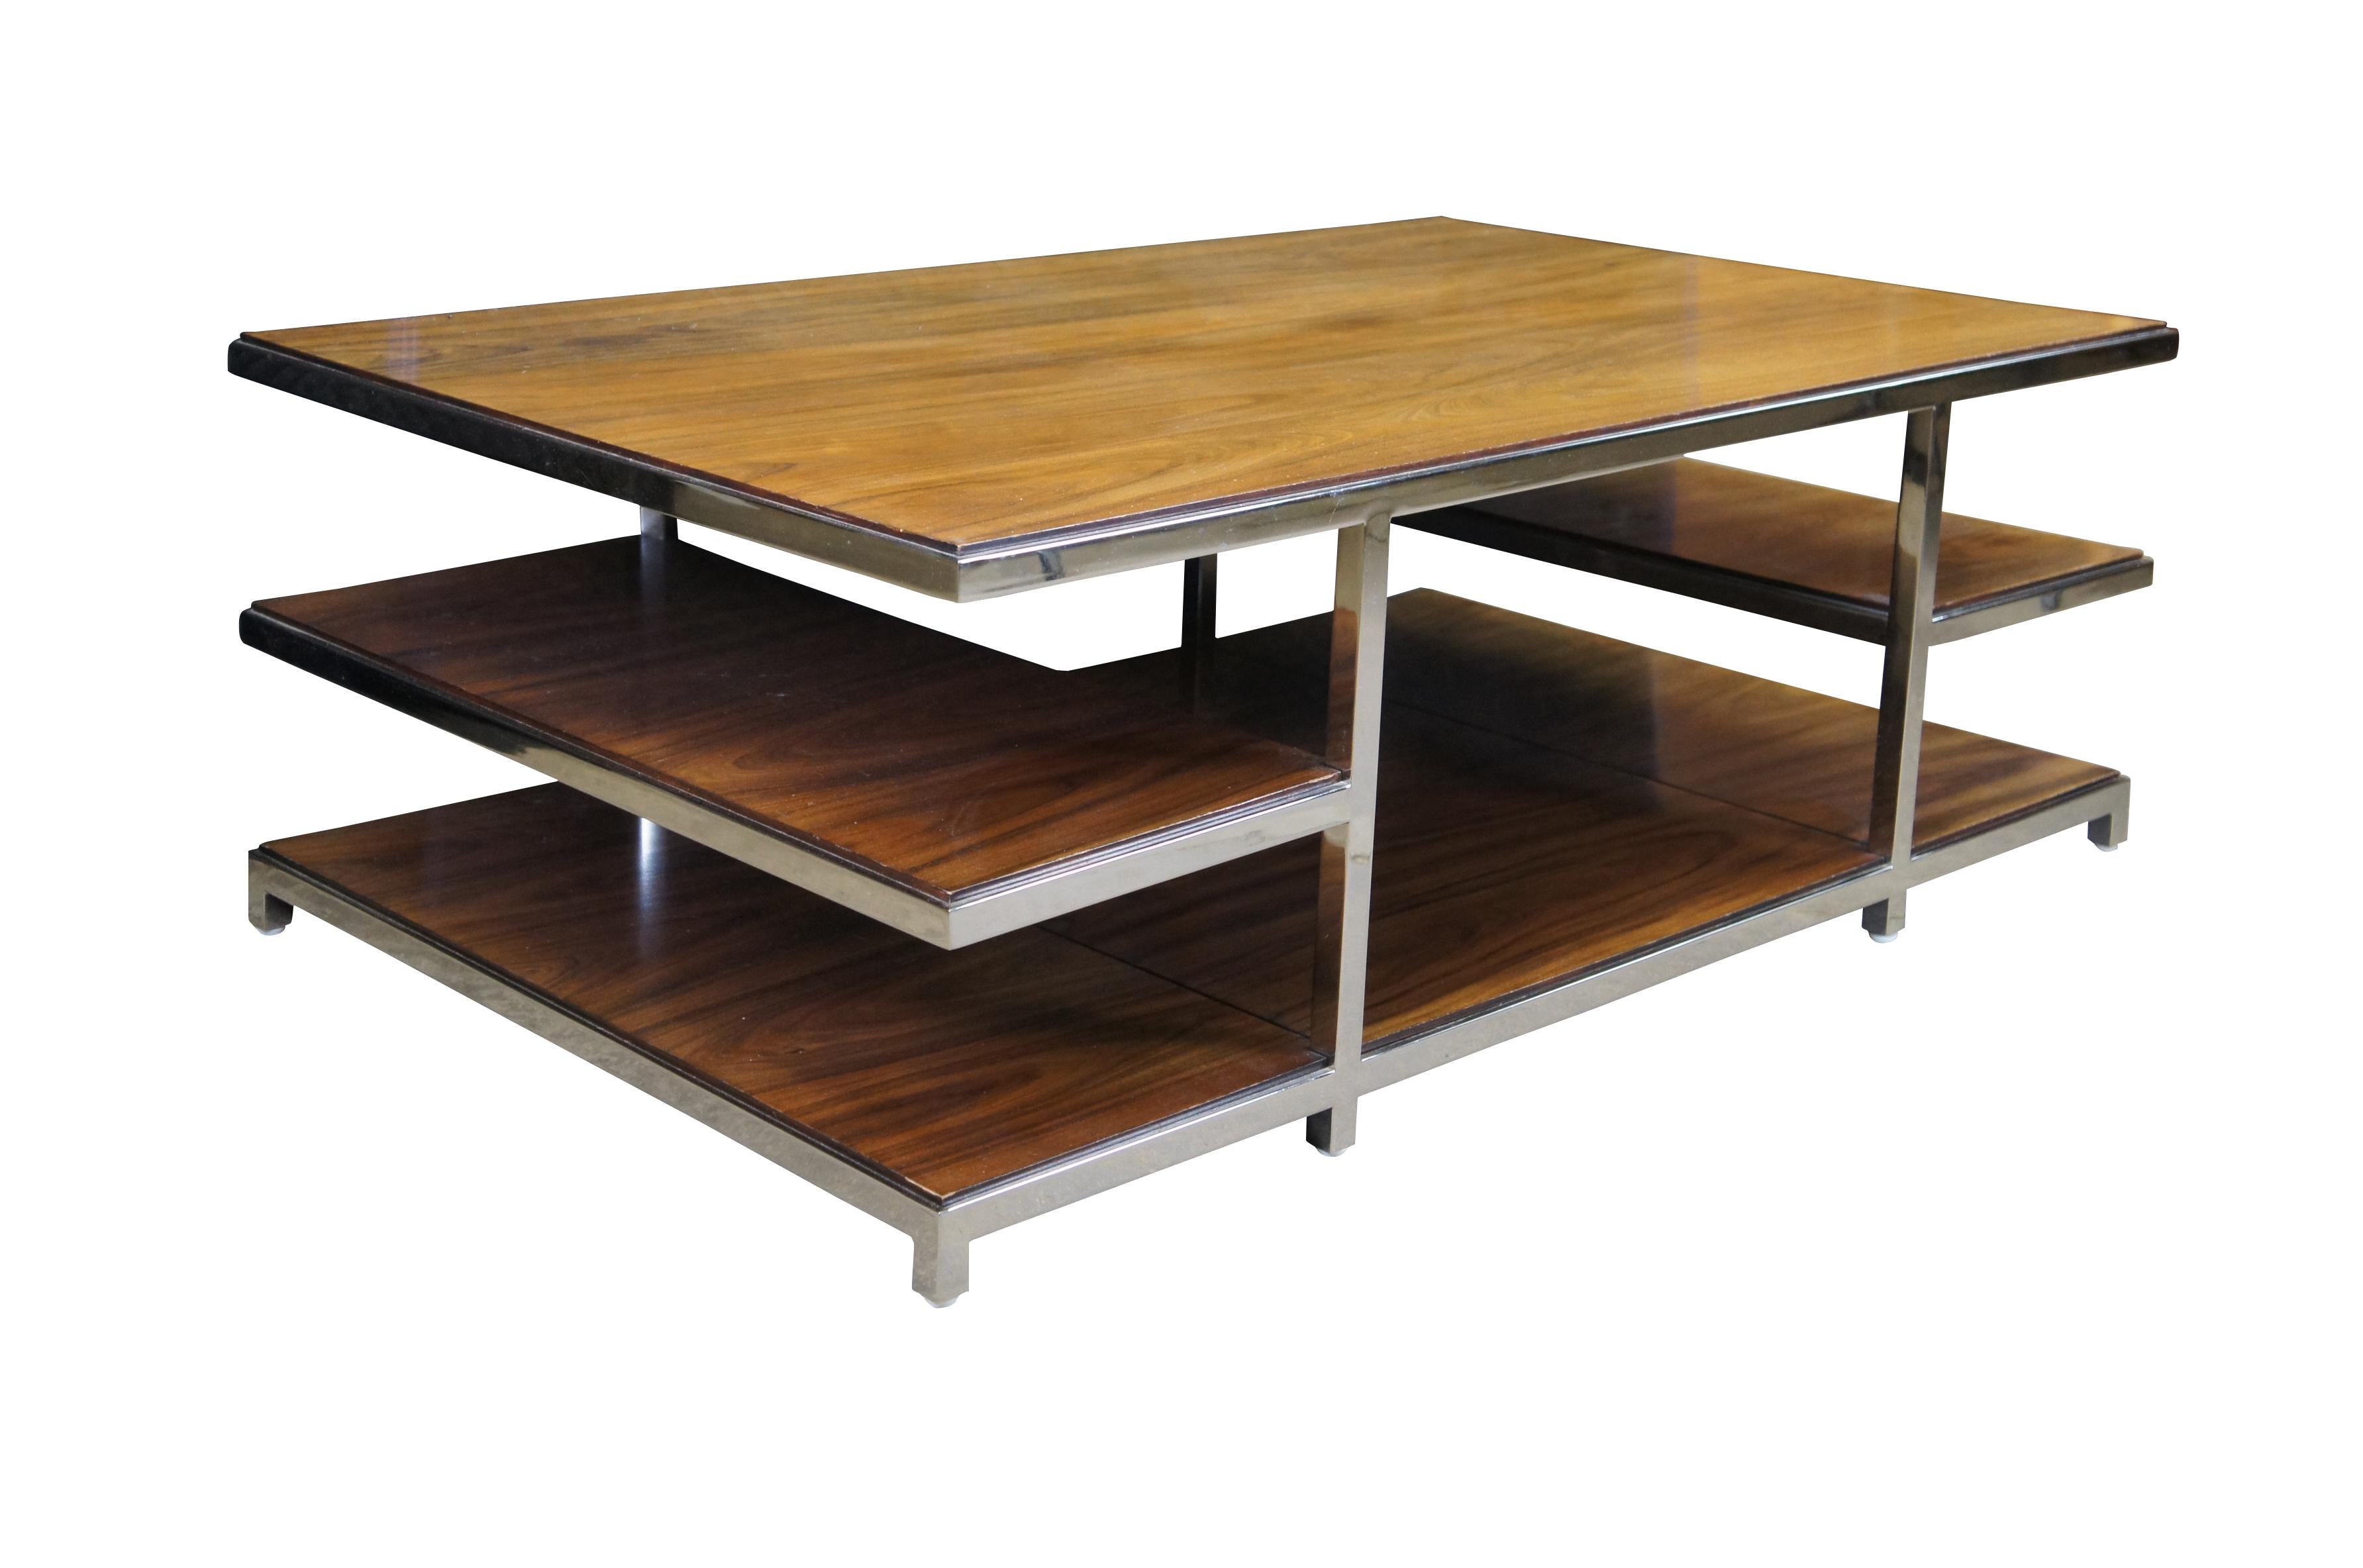 Williams Sonoma Home Tribeca Coffee Table. Sturdy stainless-steel chrome finished frame features seamless welding for a sleek, uniform appearance. A rosewood surface and tiered shelves create an open, airy look . Enables artful organization of